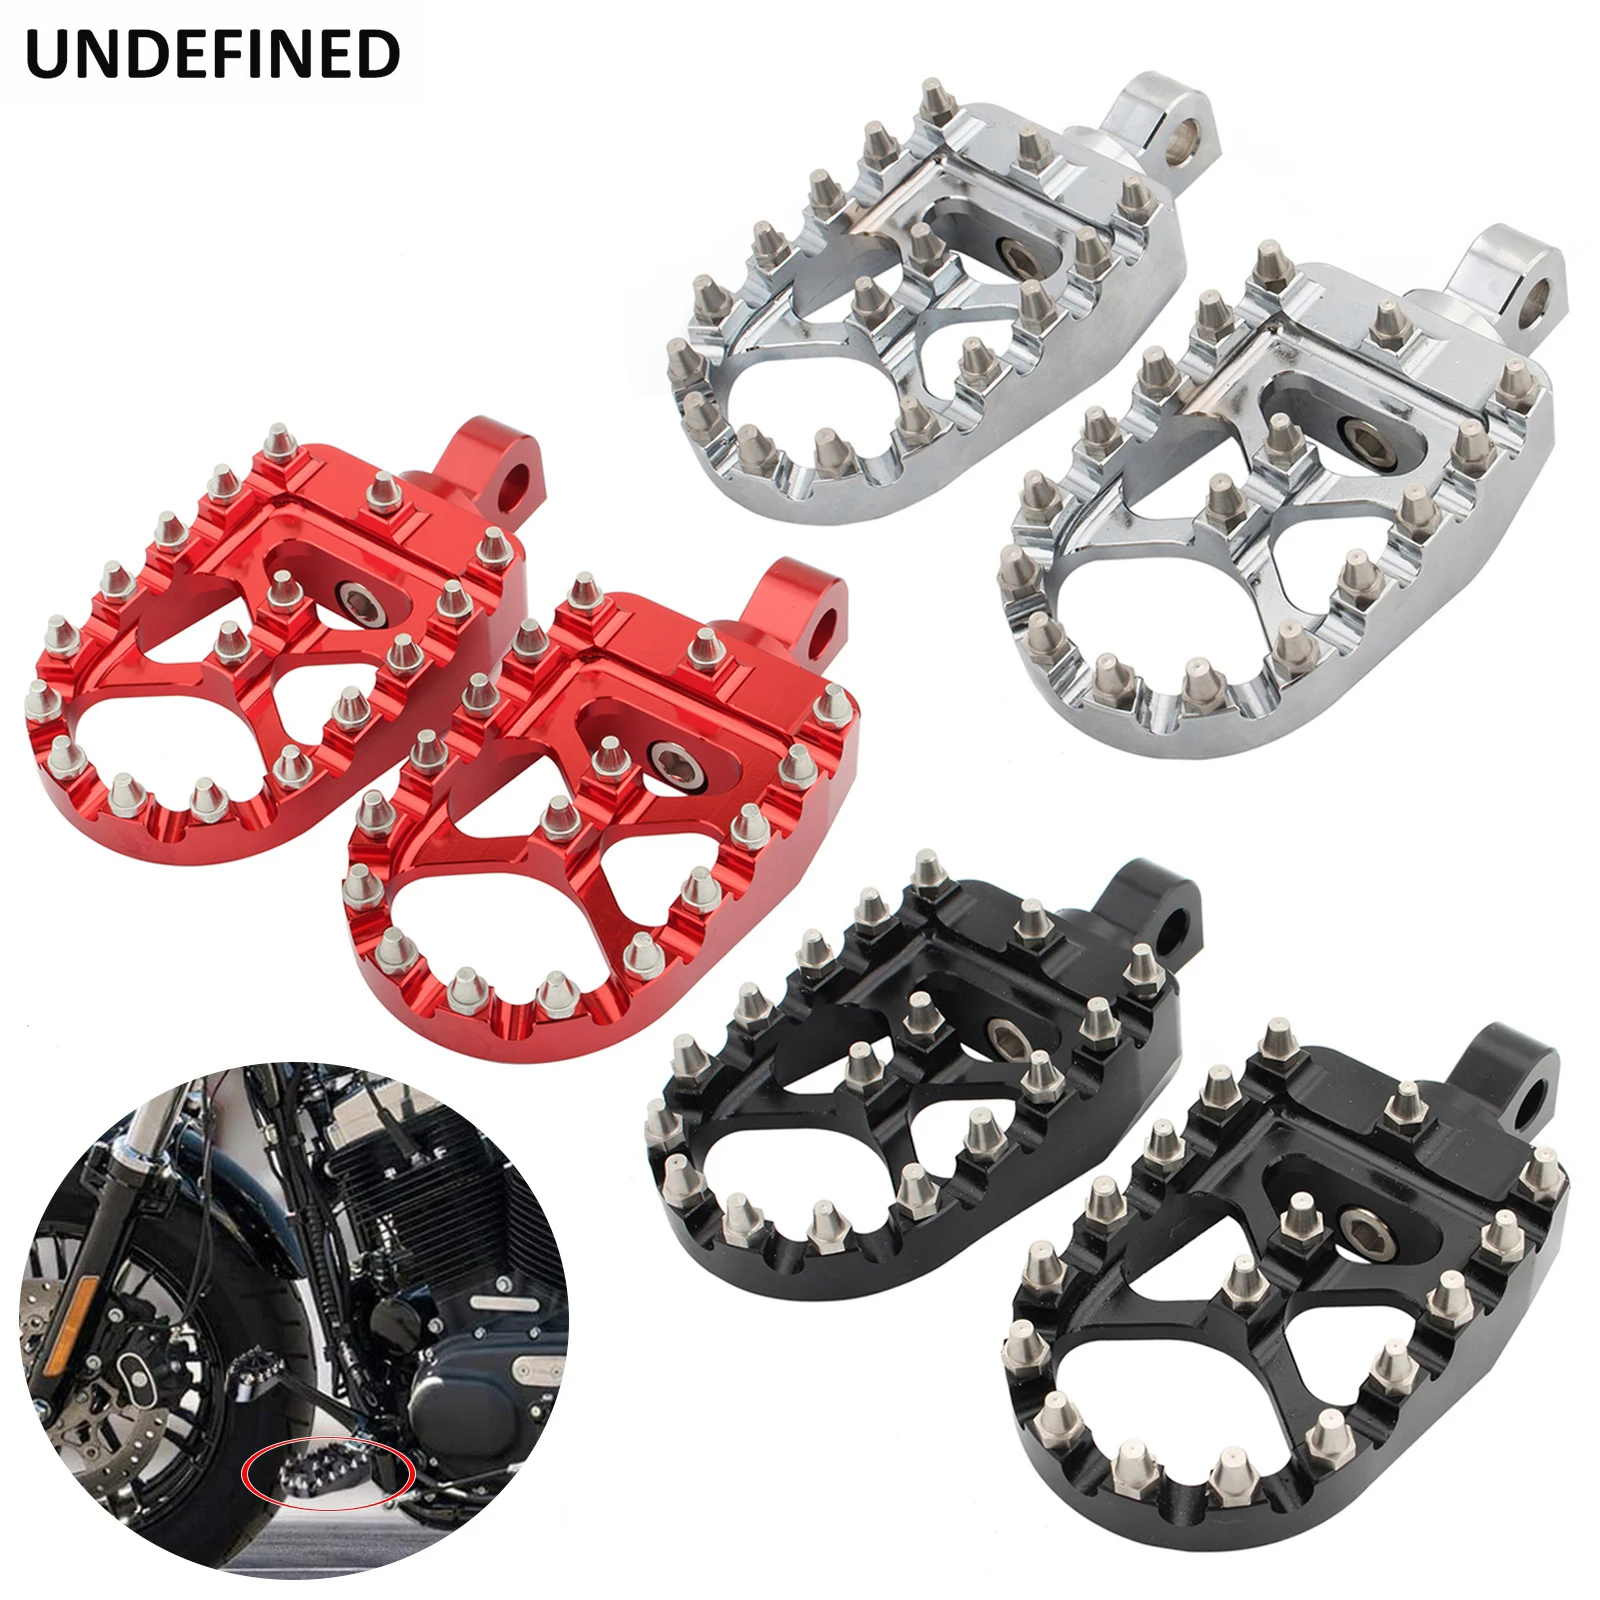 

Motorcycle MX Offroad Foot Pegs Front Footrests Pedals For Harley Sportster XL 883/1200 Touring Street Glide Dyna Softail Fatbob